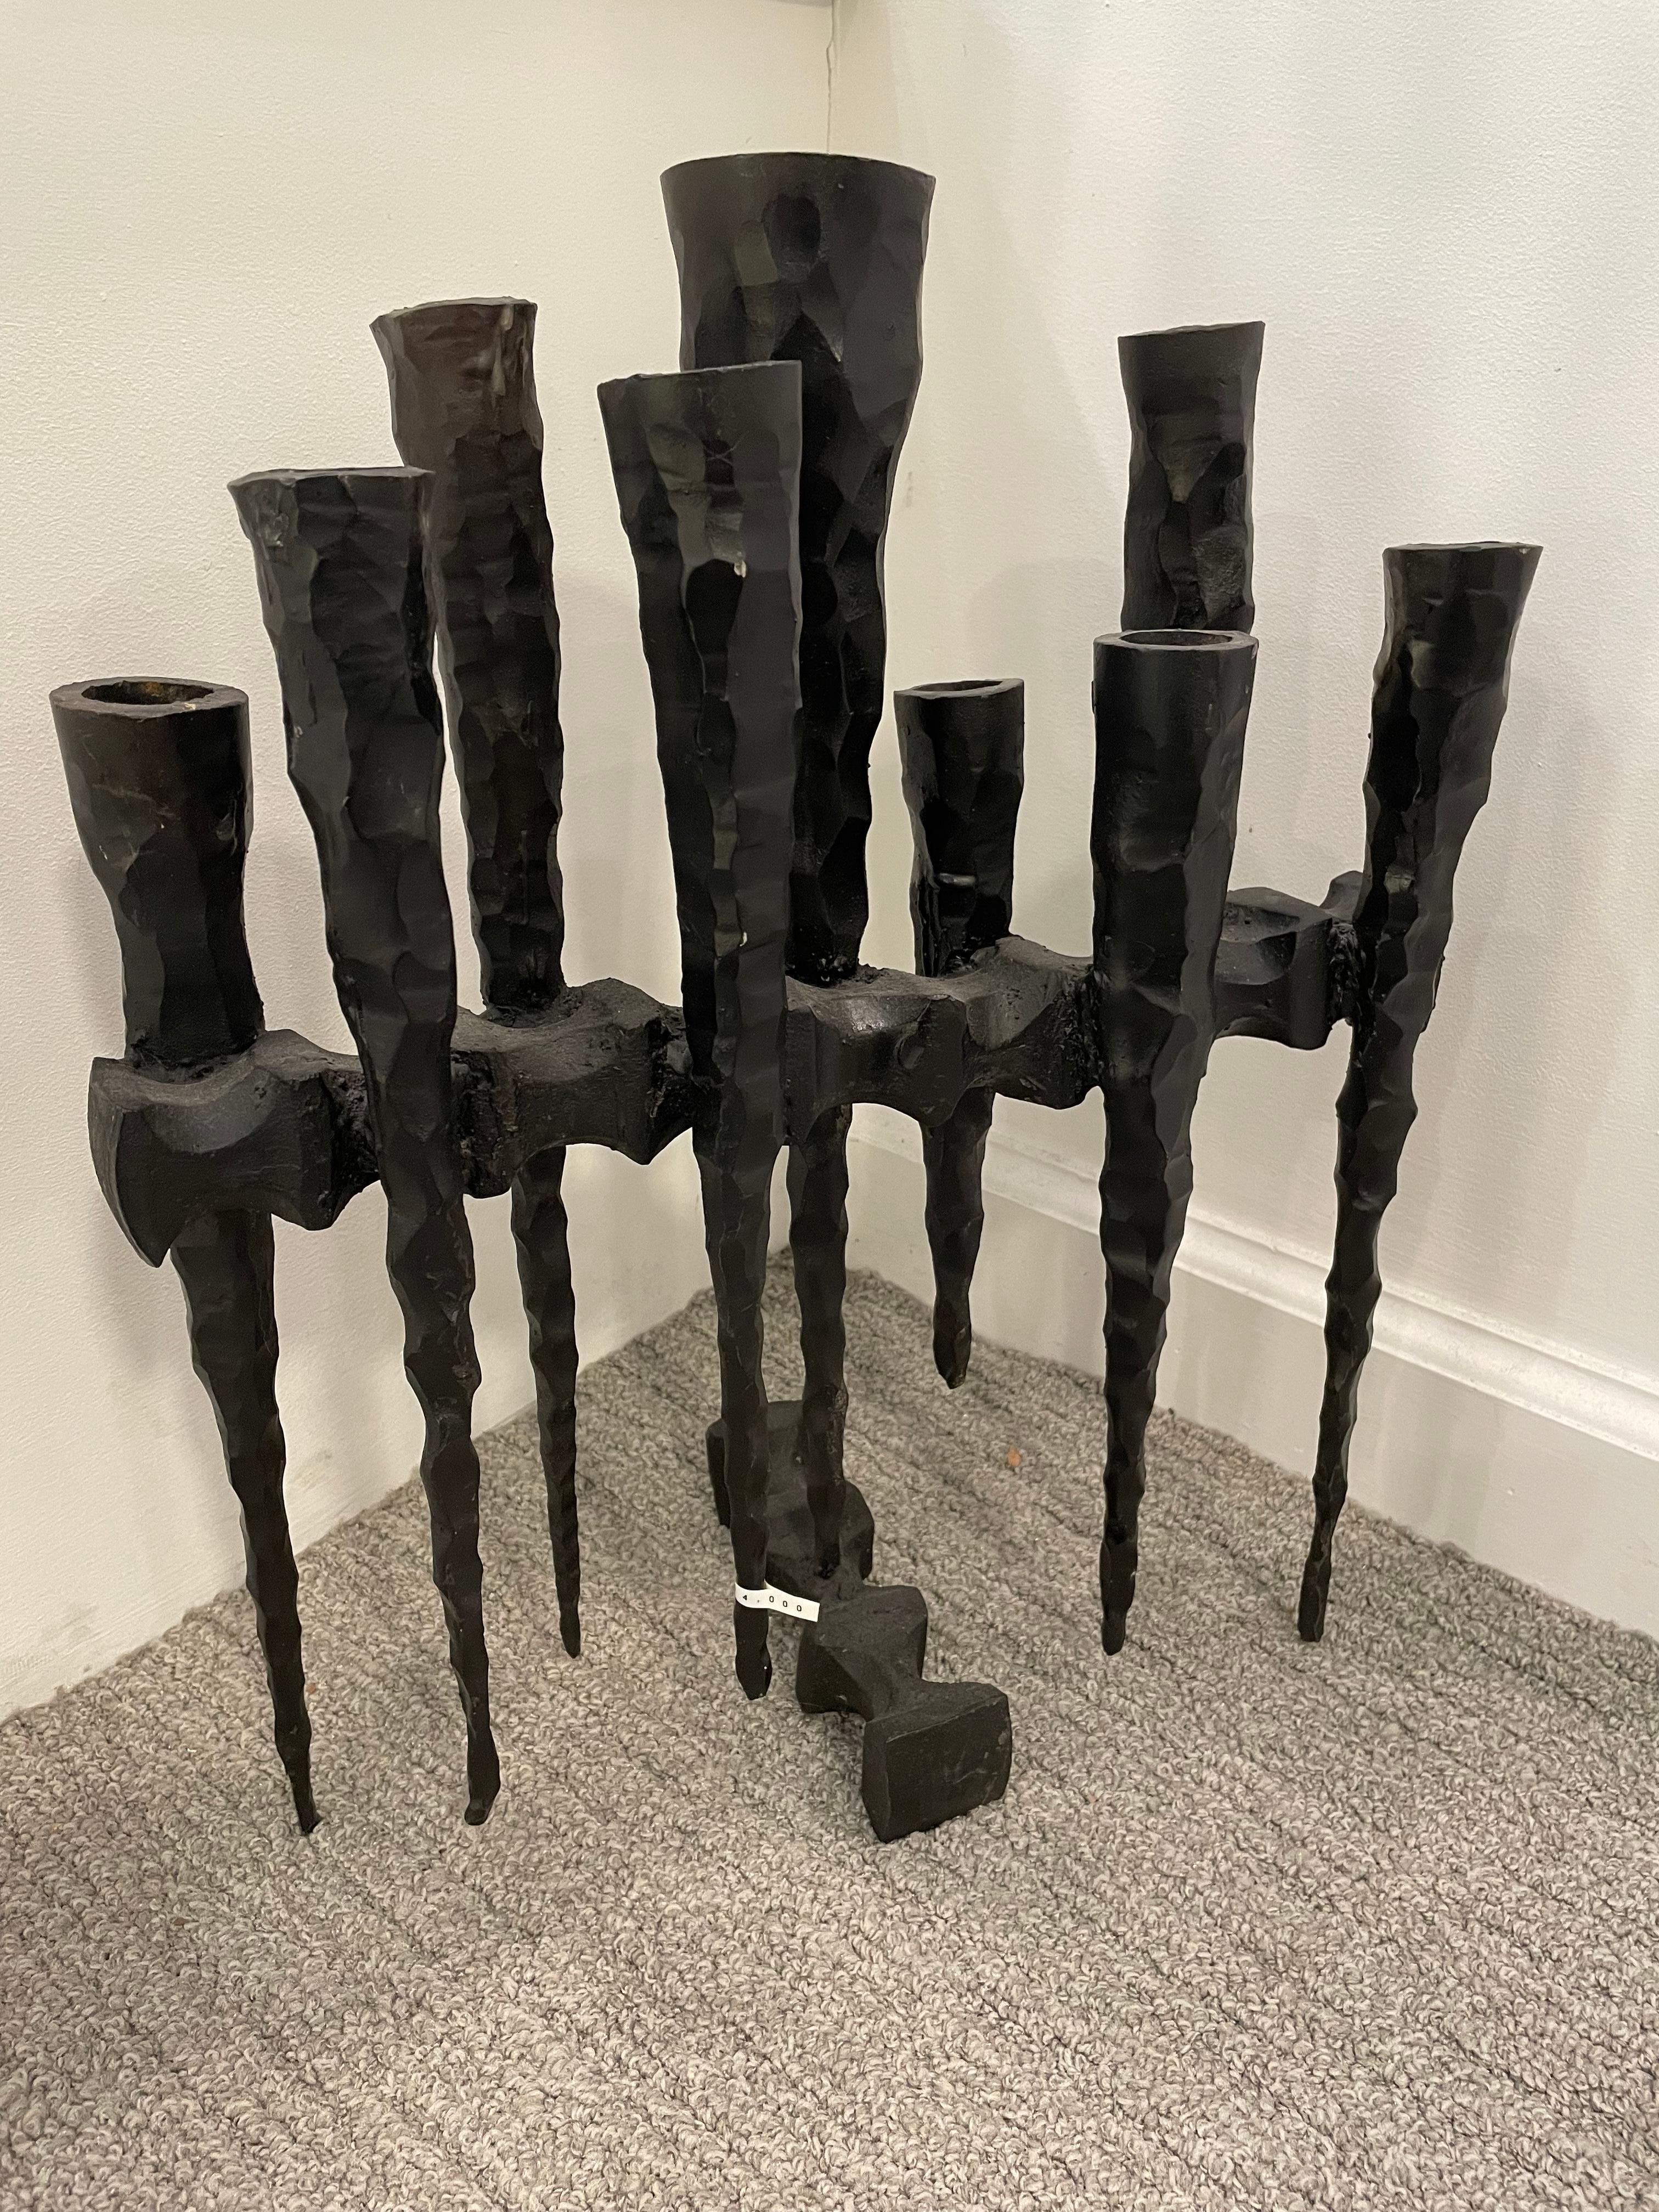 Hand-Crafted Mid-20th Century Brutalist Iron Hanukkah Lamp by David Palombo For Sale